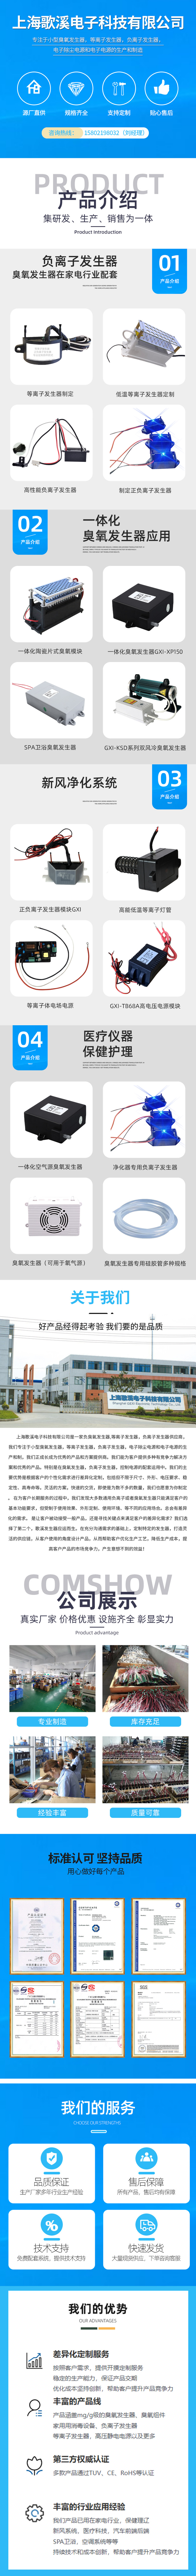 High voltage electrostatic power supply negative ion high voltage bag purifier accessories with small volume and stable performance